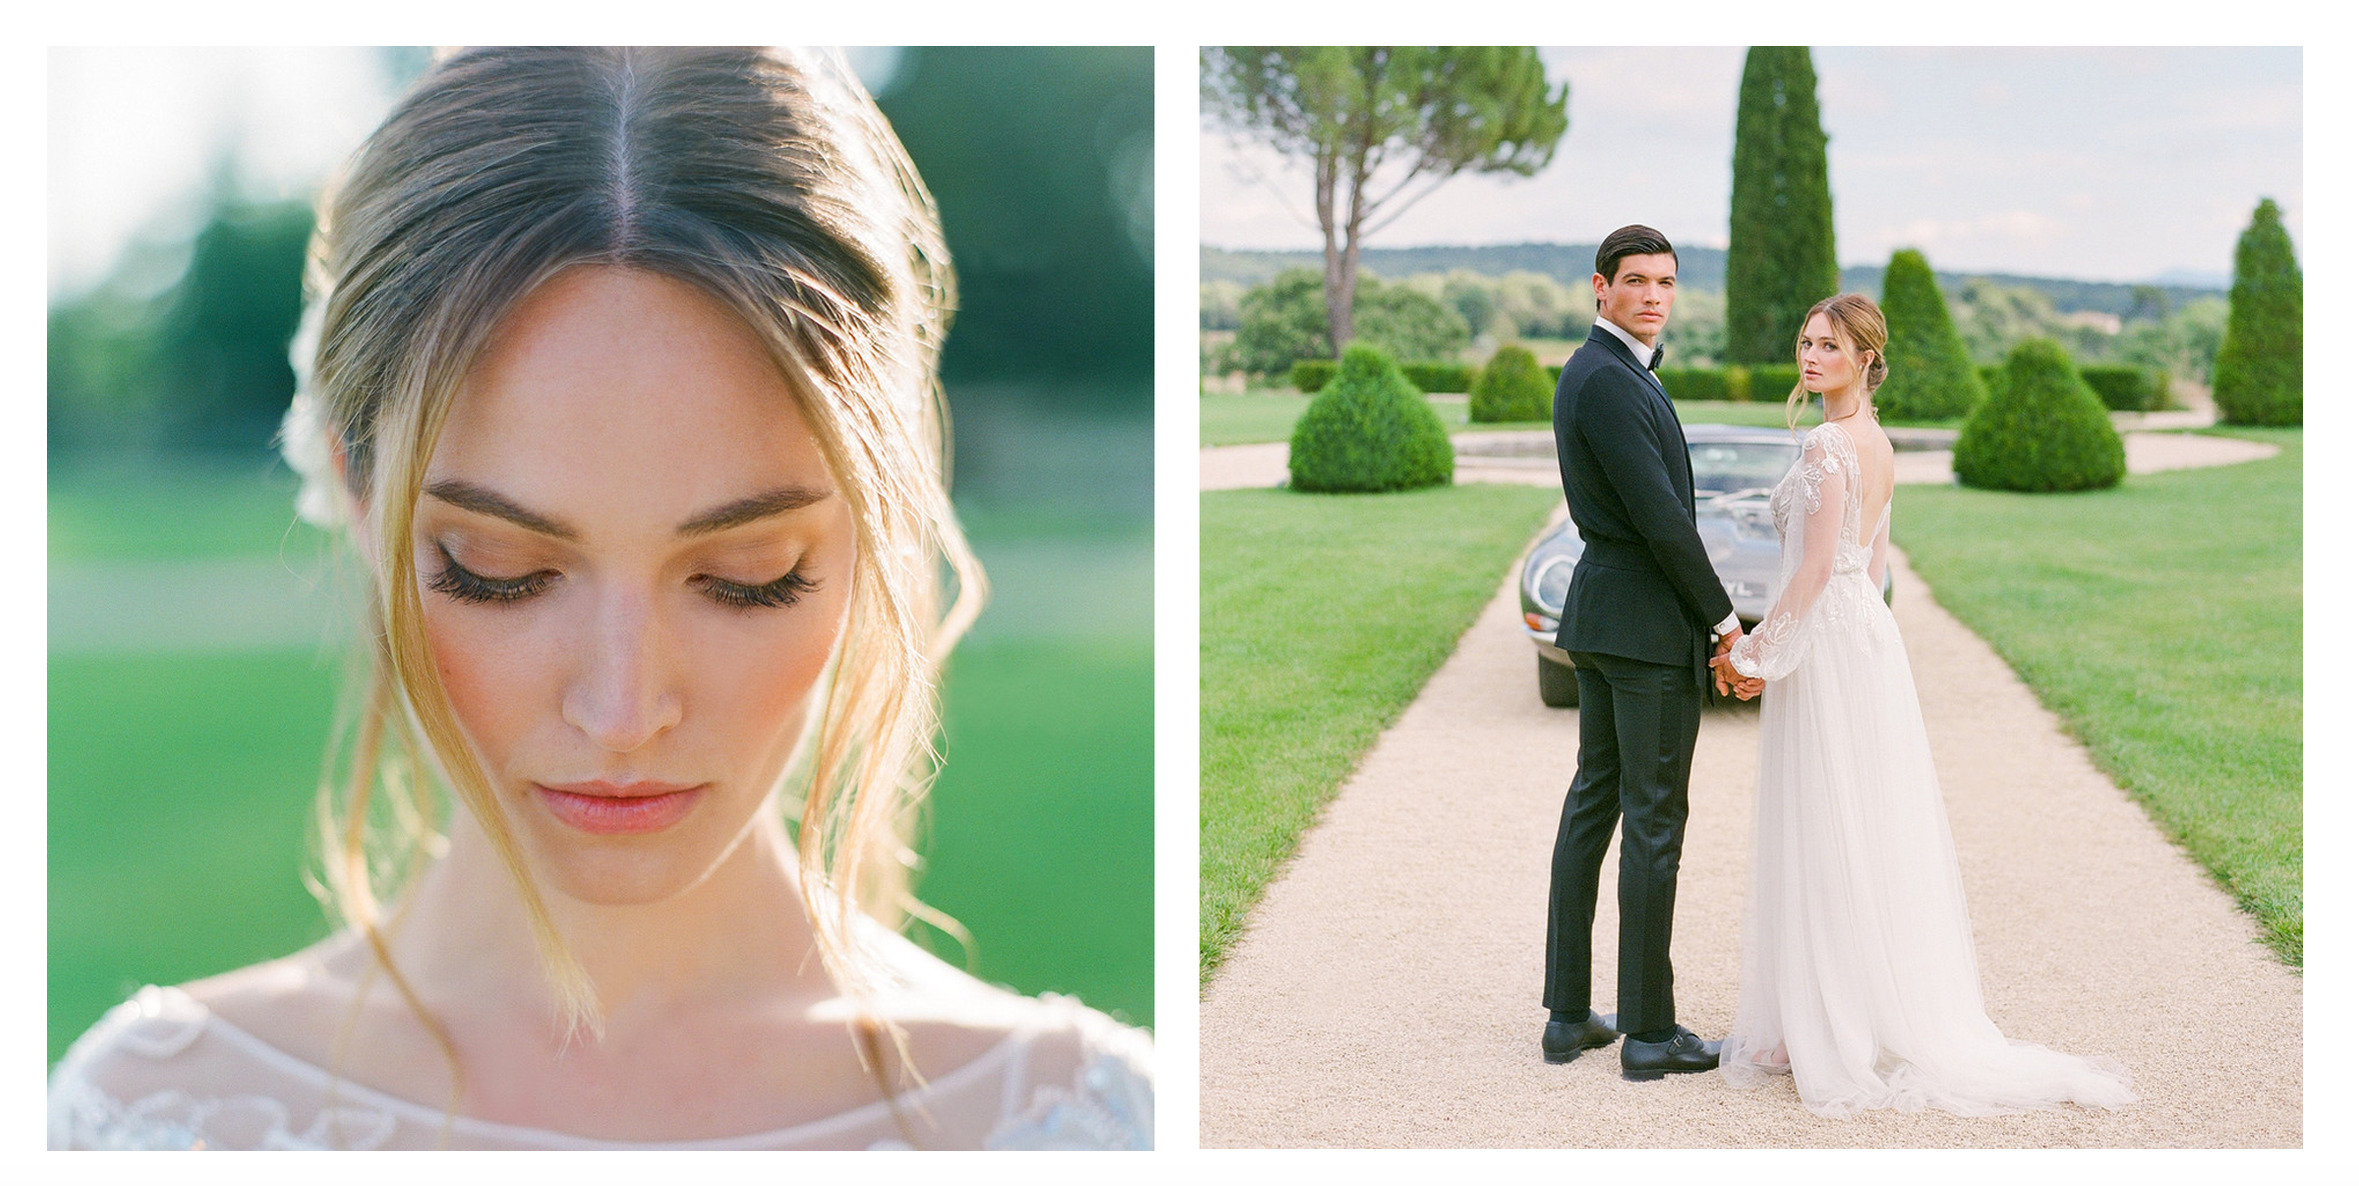 Provence wedding photographer. South of France makeup artist. Provence makeup artist. South of France wedding photographer. 